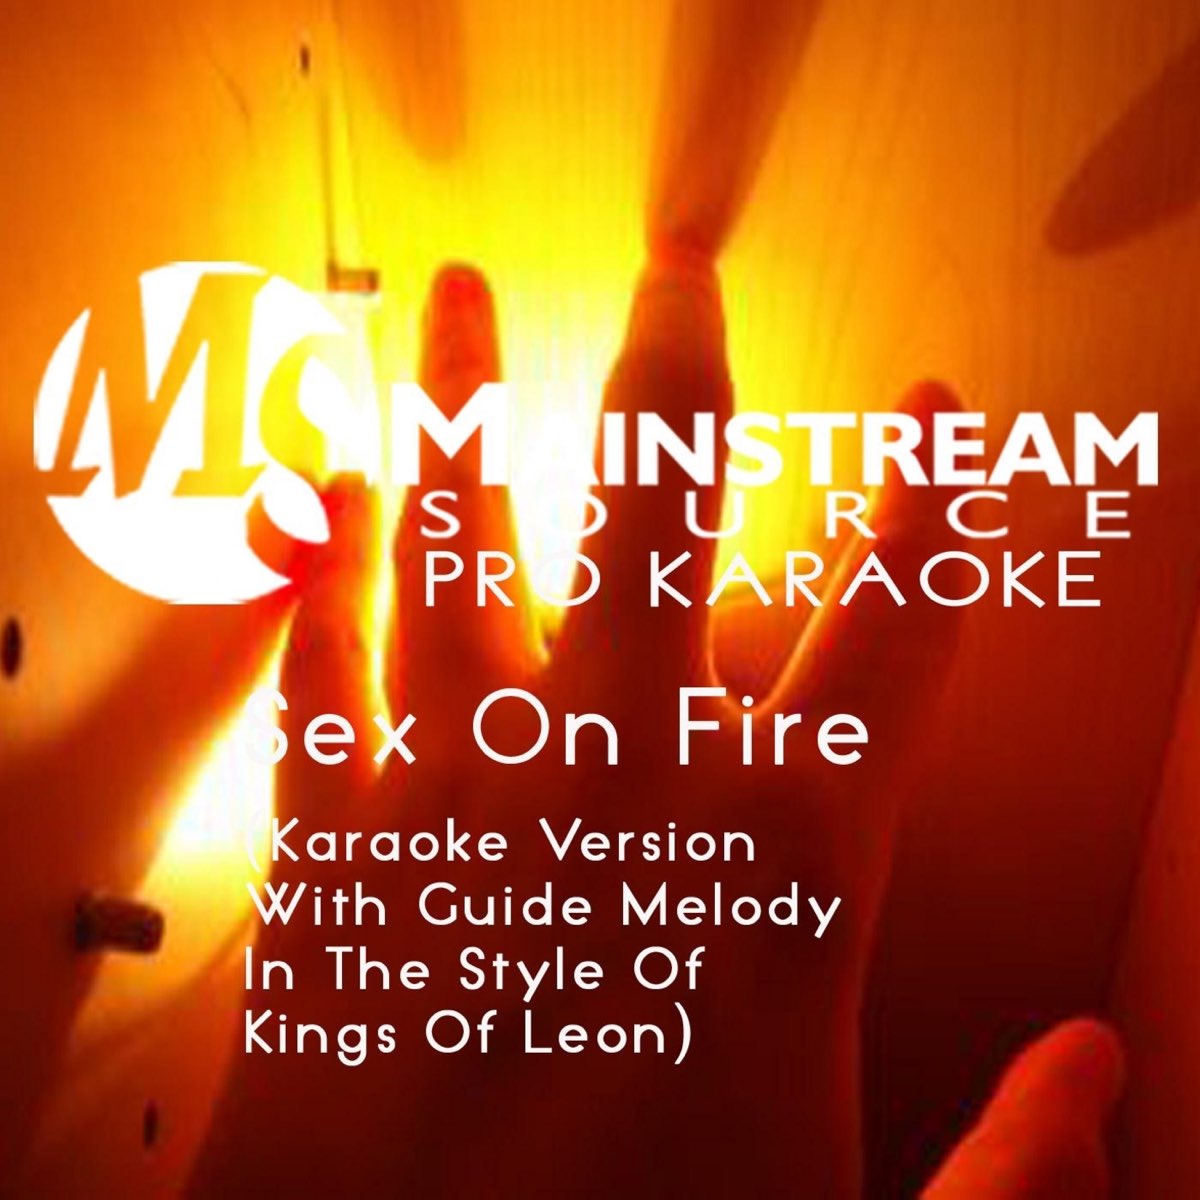 Sex On Fire Karaoke Version With Guide Melody In The Style Of Kings Of Leon Single By